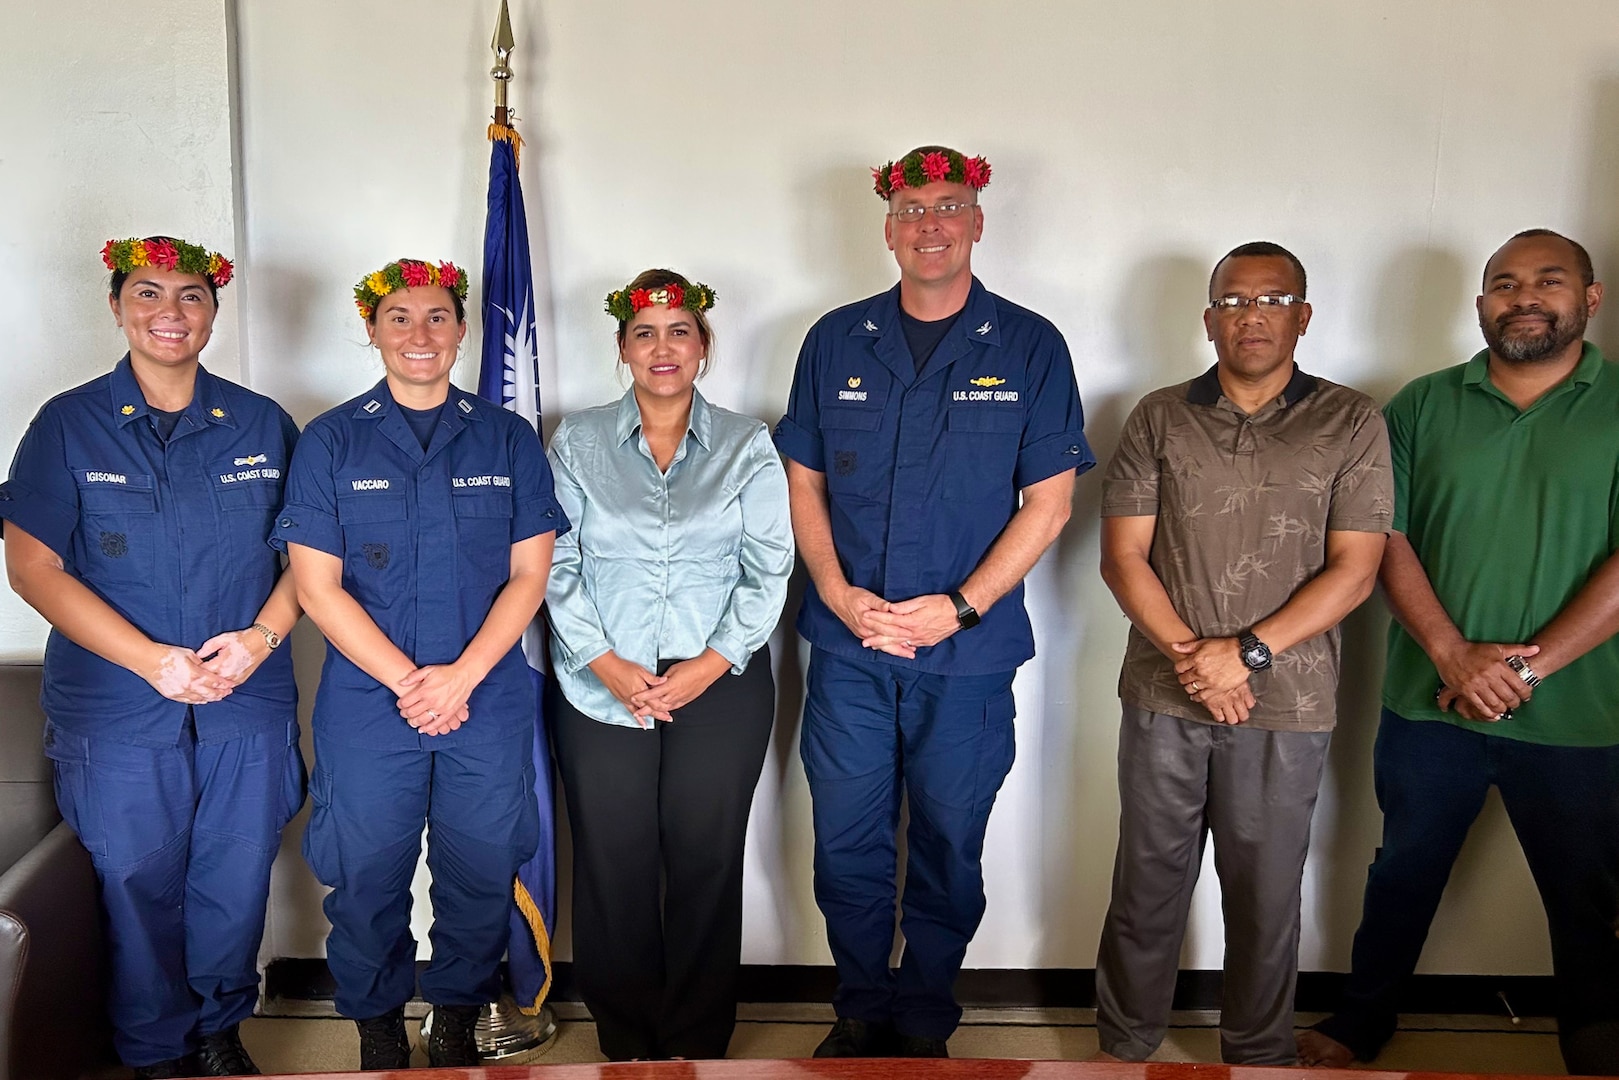 Capt. Nicholas Simmons, commander of U.S. Coast Guard Forces Micronesia/Sector Guam (CGFM/SG), and members of the CGFM/SG Compact of Free Association team stand for a photo RMI Environmental Protection Authority on Sept. 21, 2023. Simmons led a delegation to the Republic of the Marshall Islands (RMI), one of the three former U.S. trust territories under the Compact of Free Association. The visit underscores CGFM/SG's strengthened role as the primary facilitator of the cooperative relationship between the U.S. Coast Guard and the RMI, reinforcing longstanding ties. (U.S. Coast Guard photo)